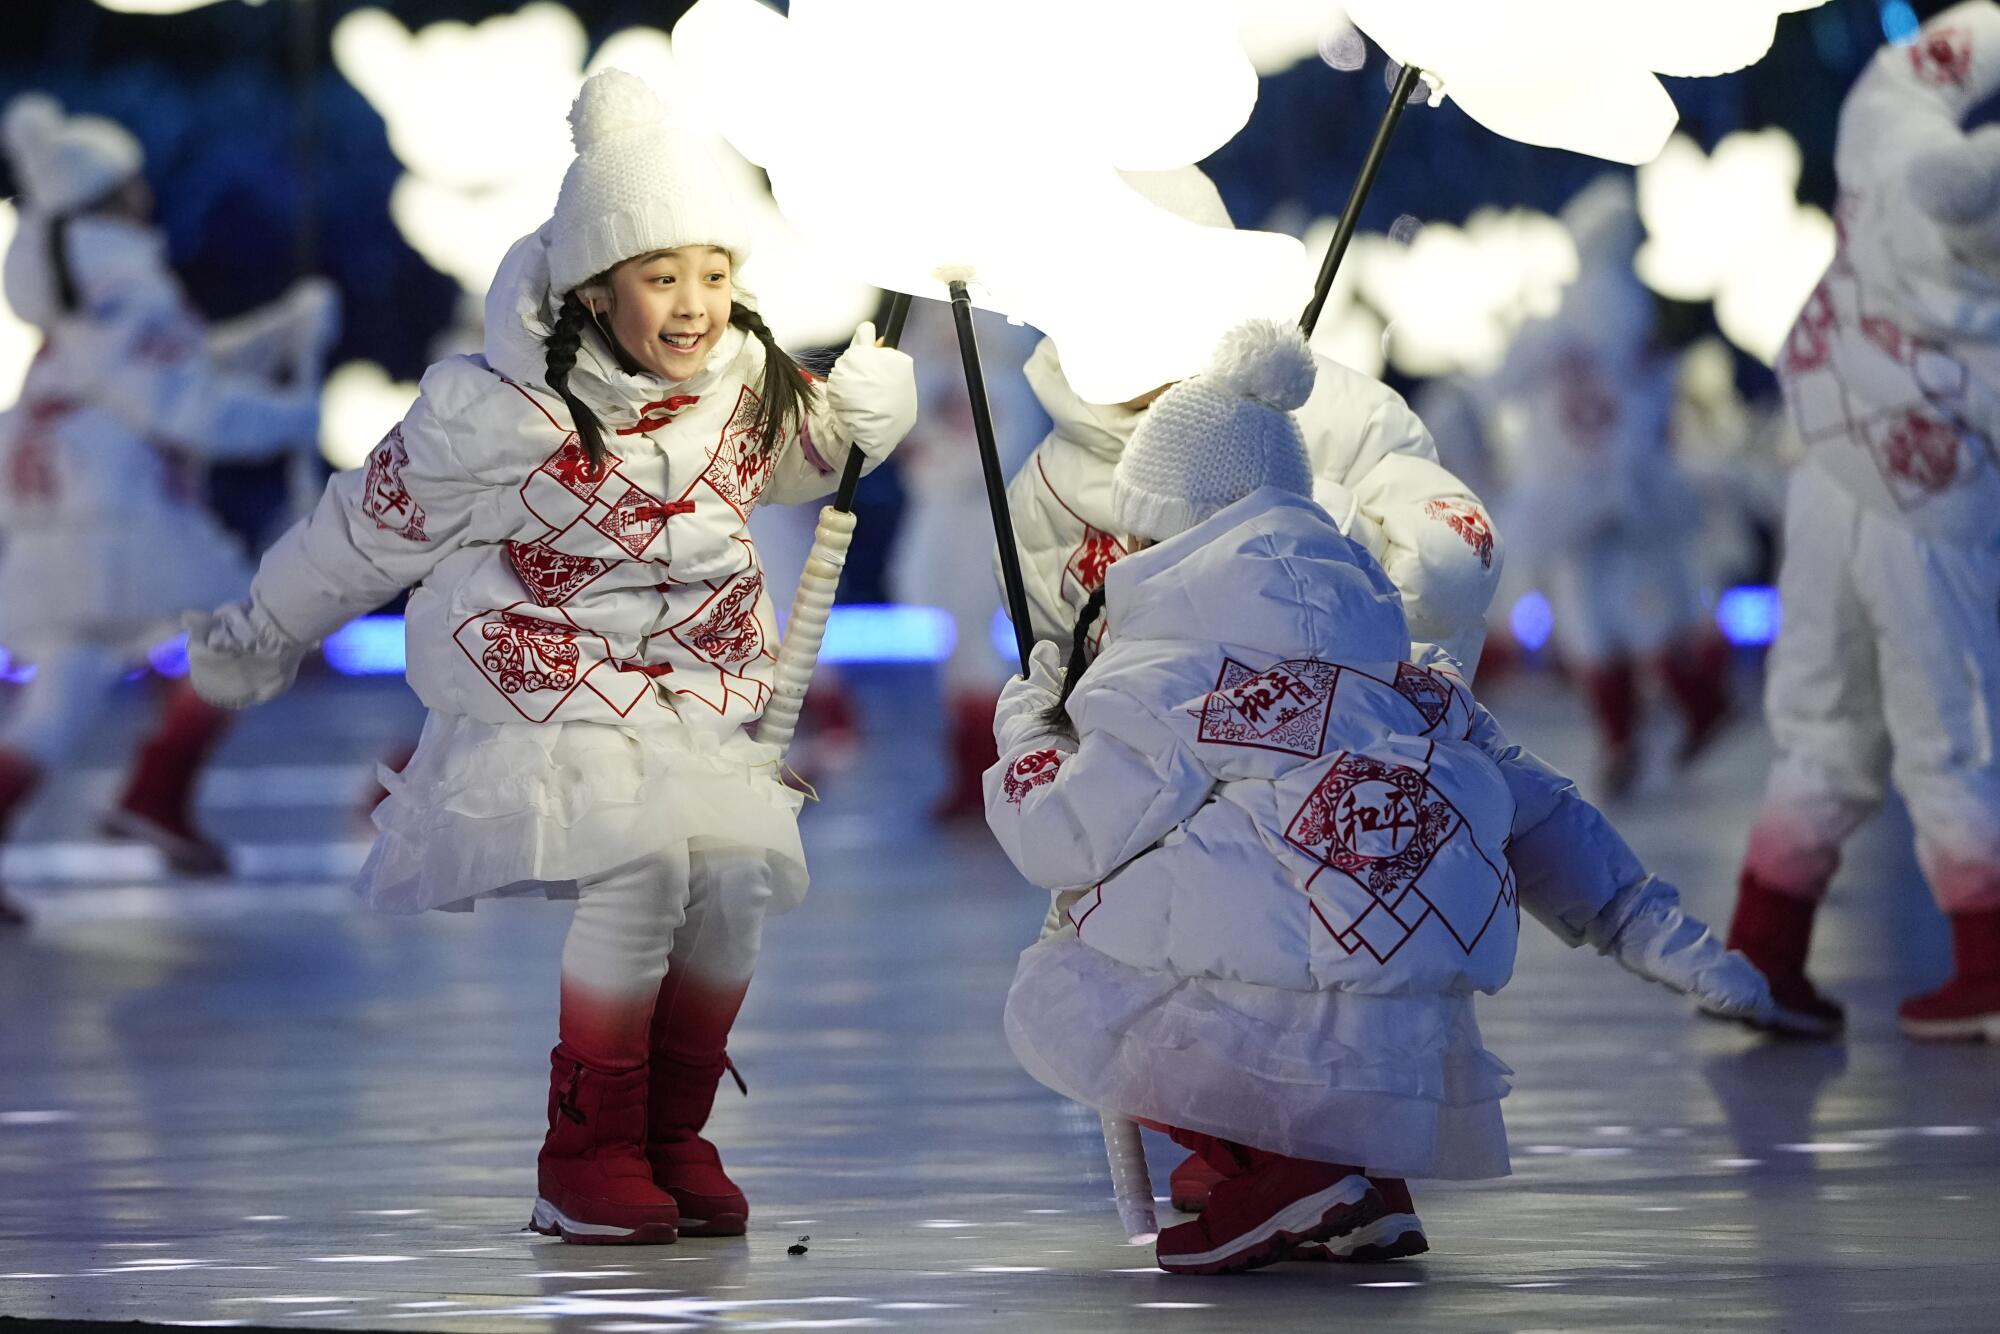 Hundreds of children perform in a segment called "The Snowflake."